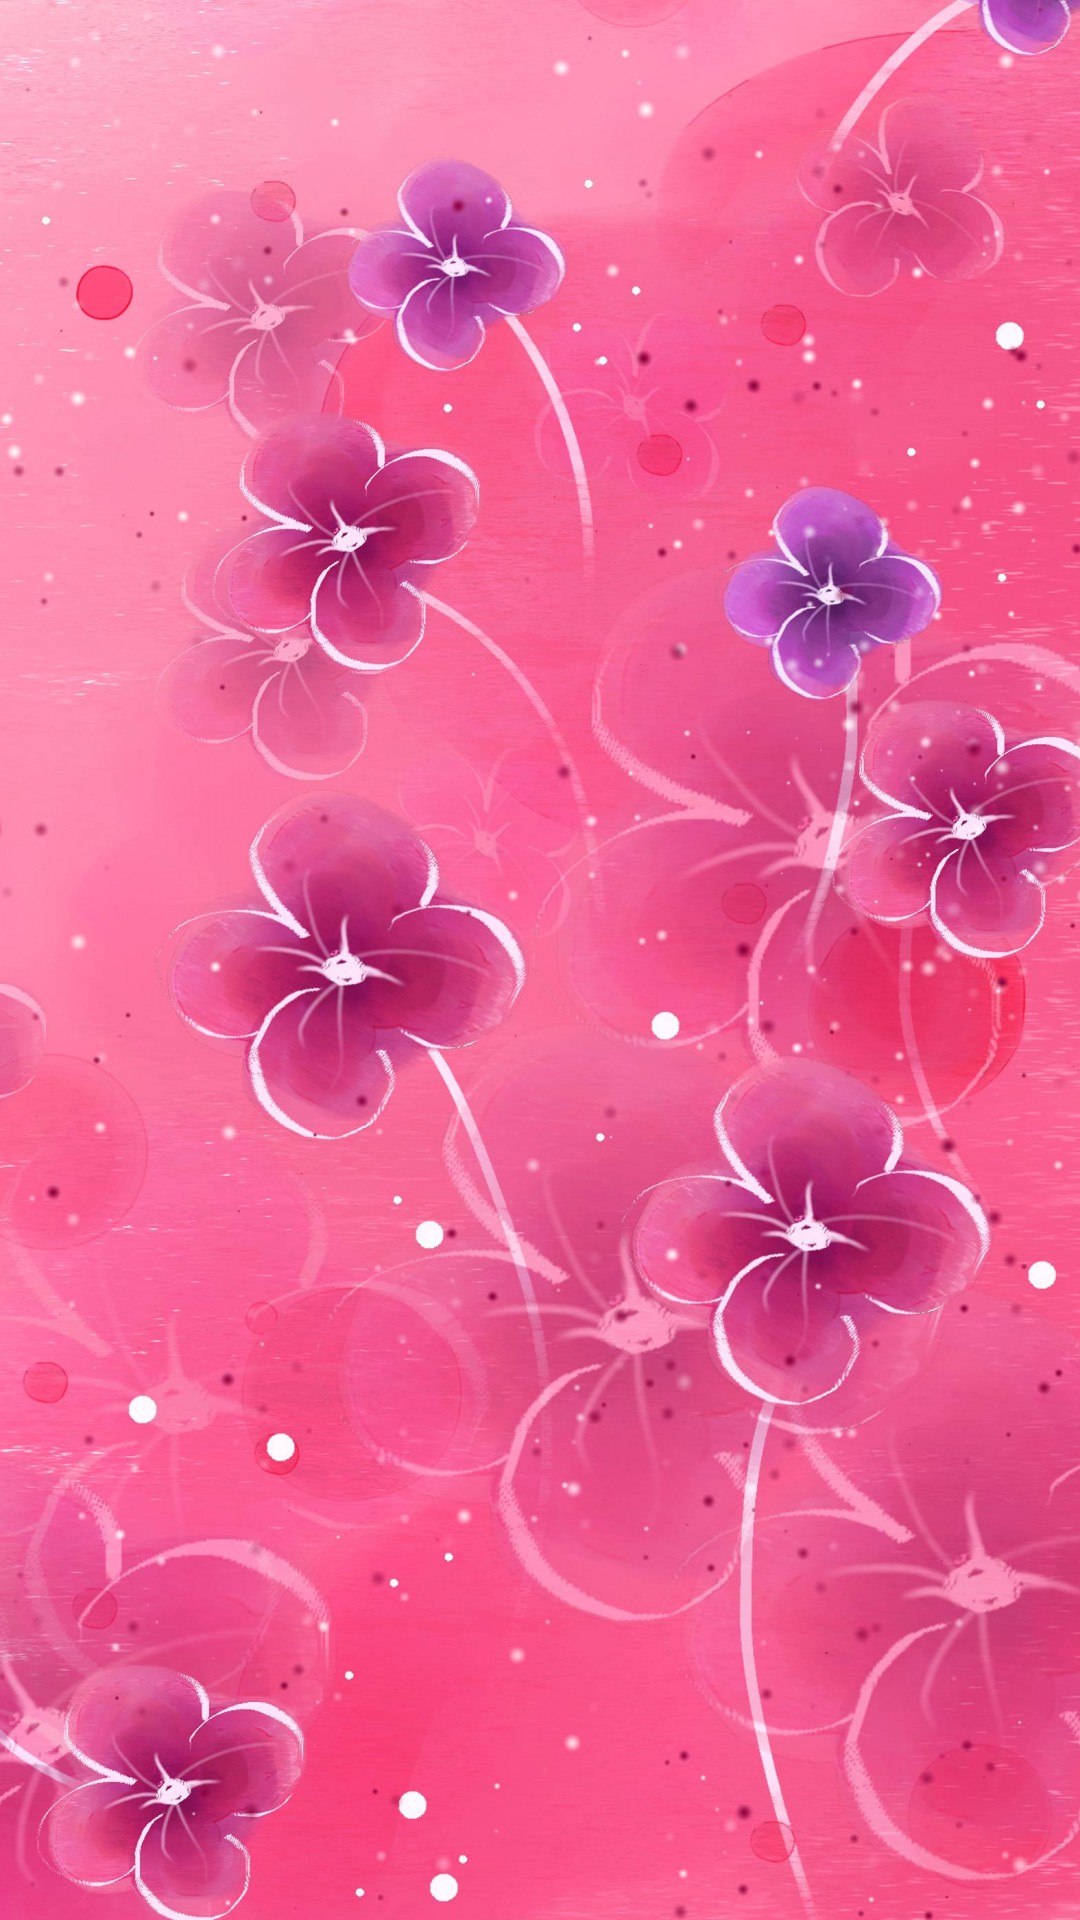 Wallpaper Weekends: In the Pink - Pink iPhone Wallpapers